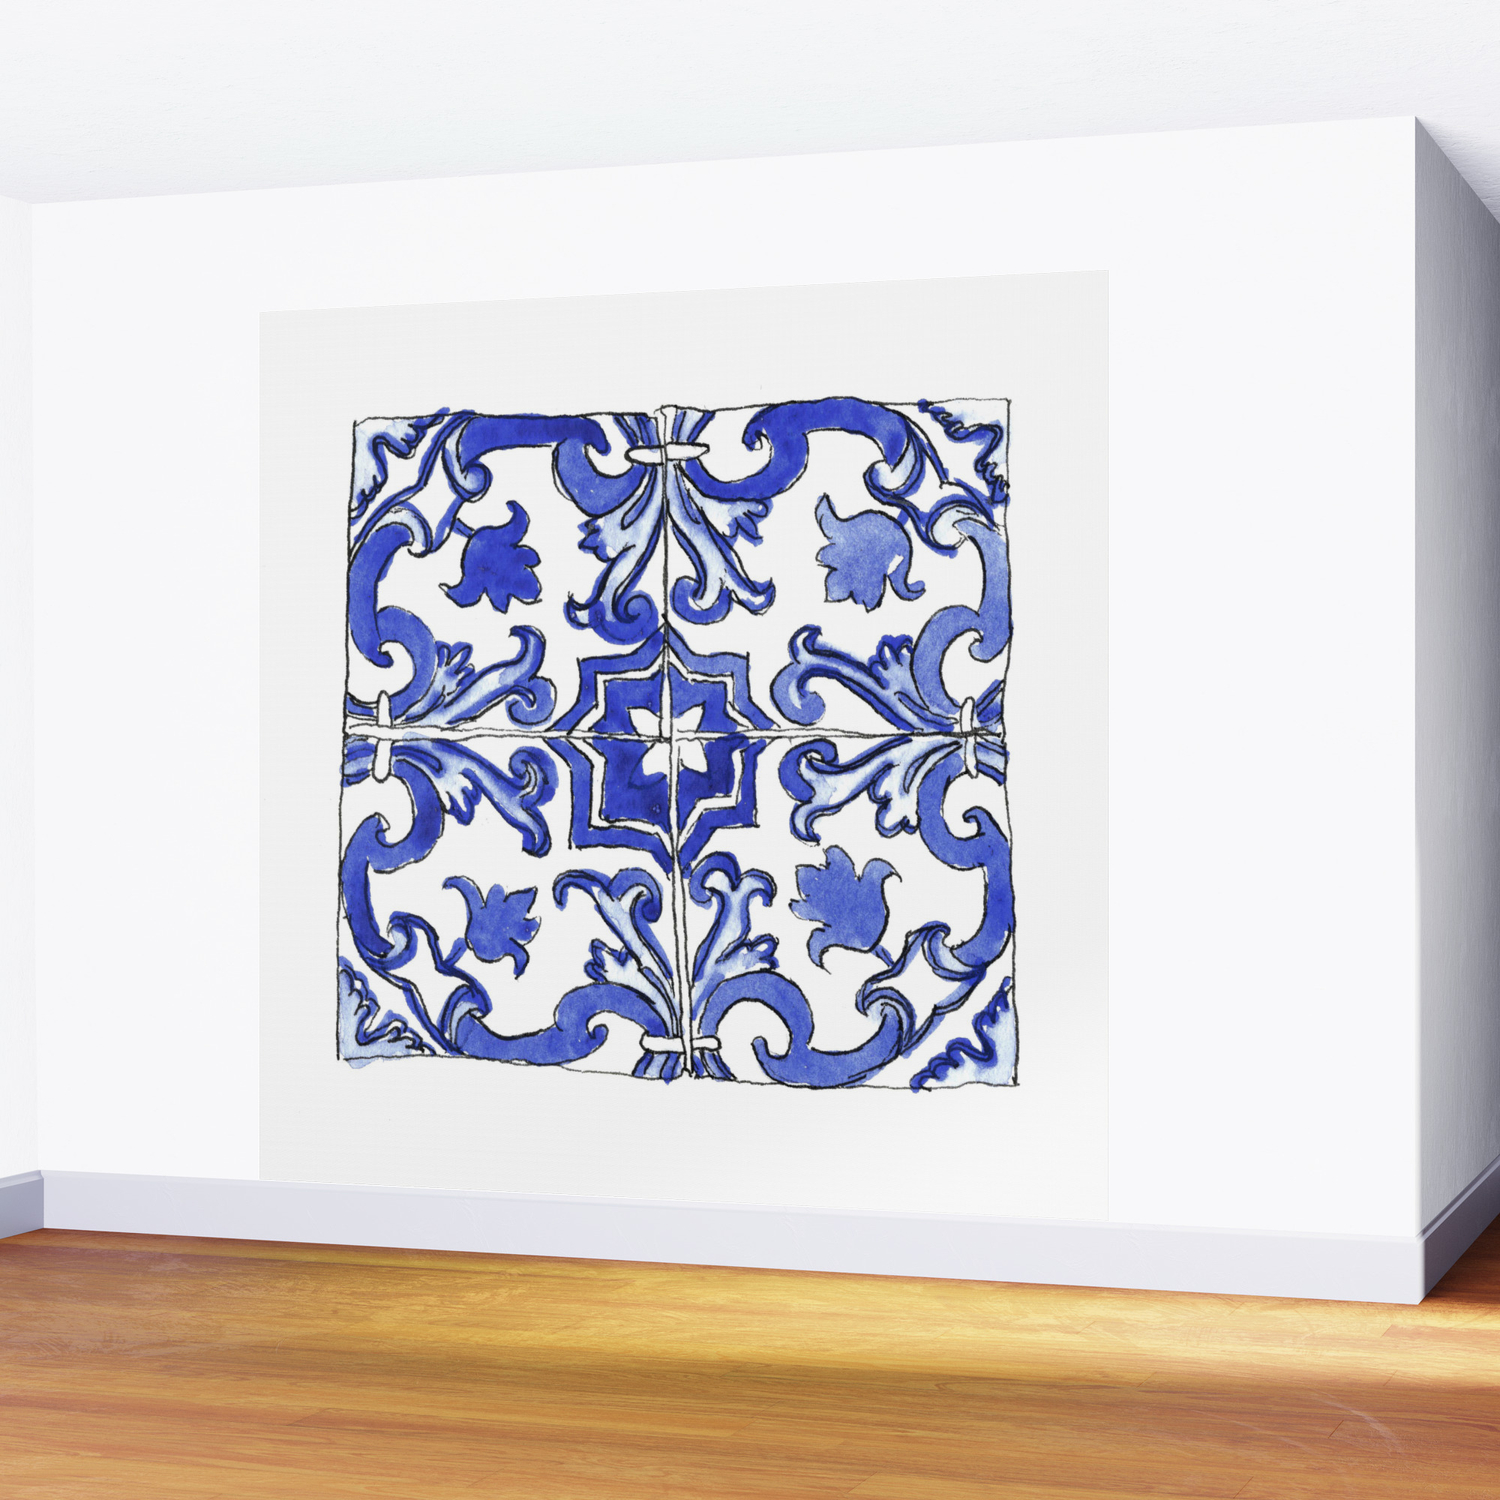 Blue and White Portuguese tile Wall Mural